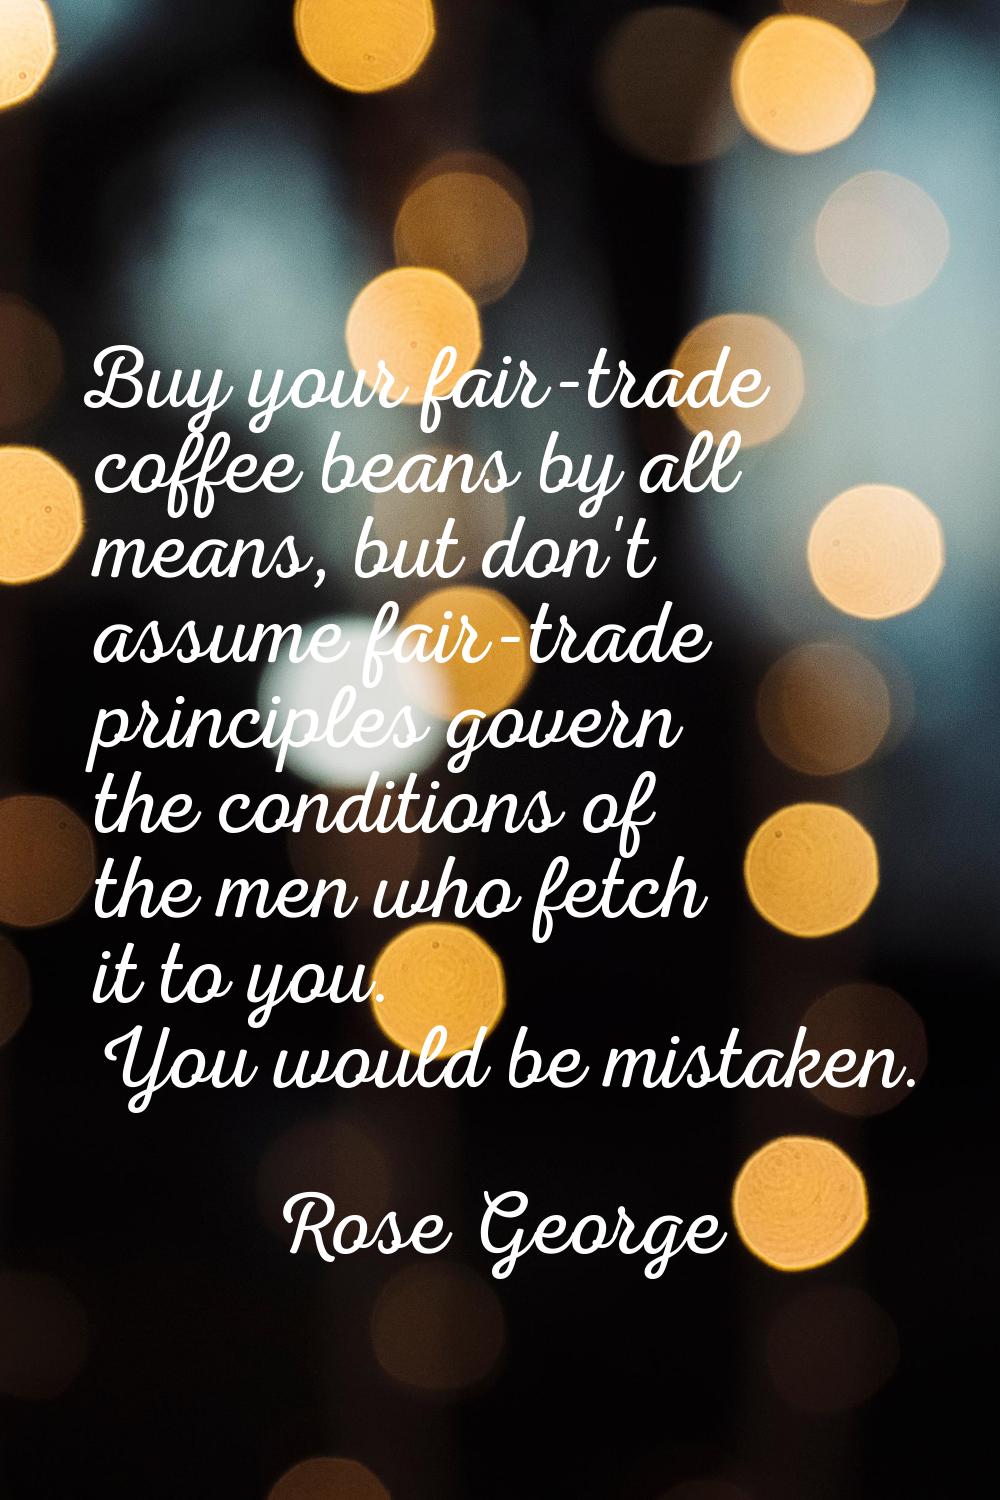 Buy your fair-trade coffee beans by all means, but don't assume fair-trade principles govern the co